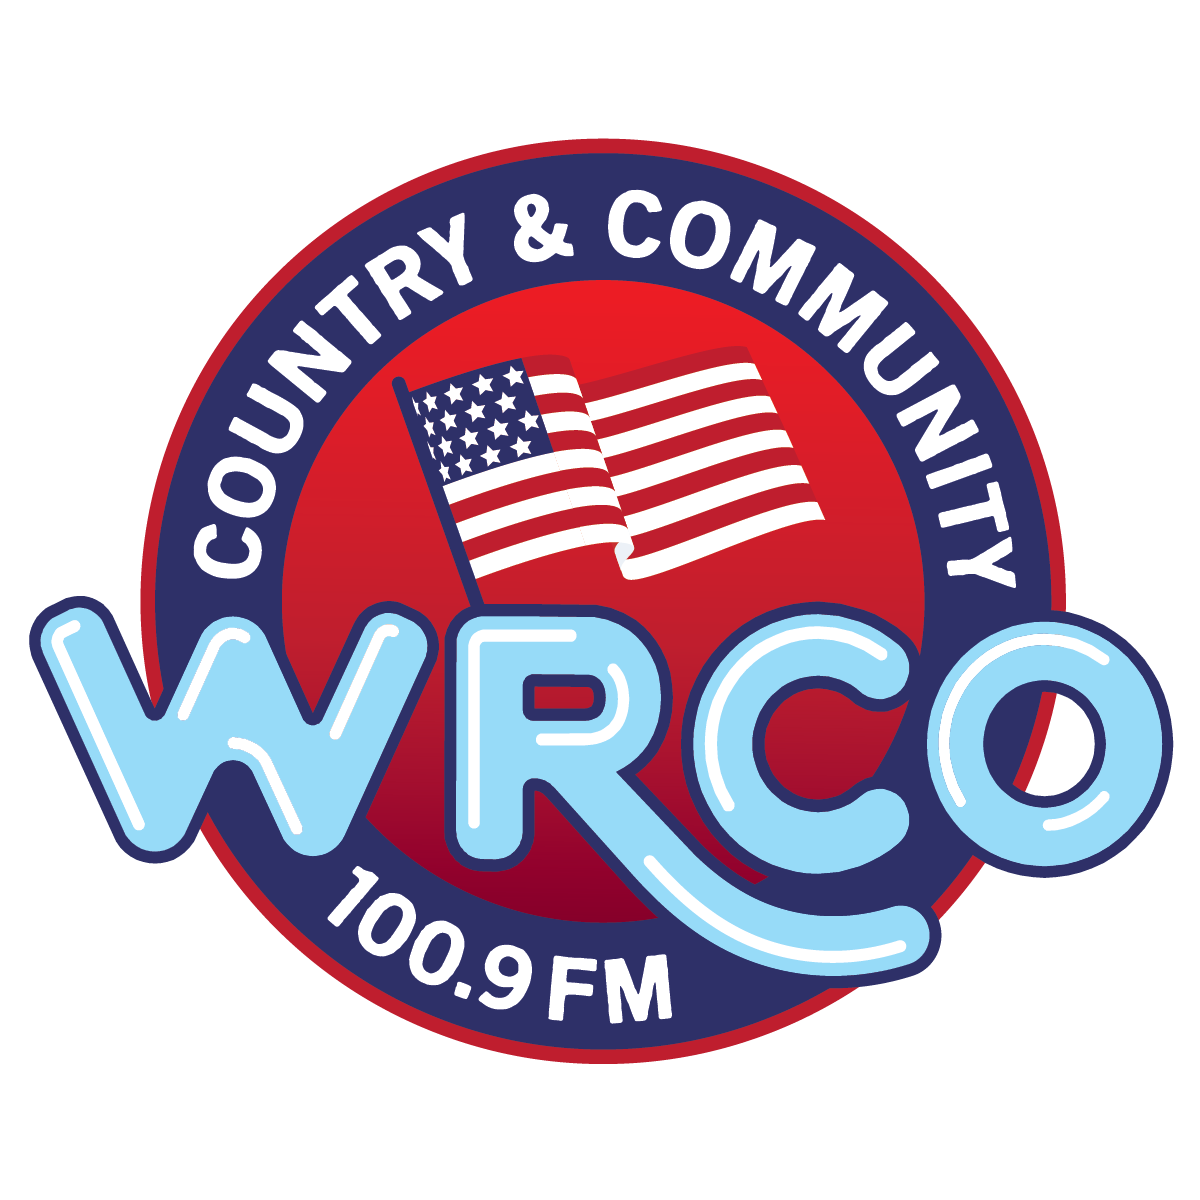 WRCO - Richland Center - Country & Community